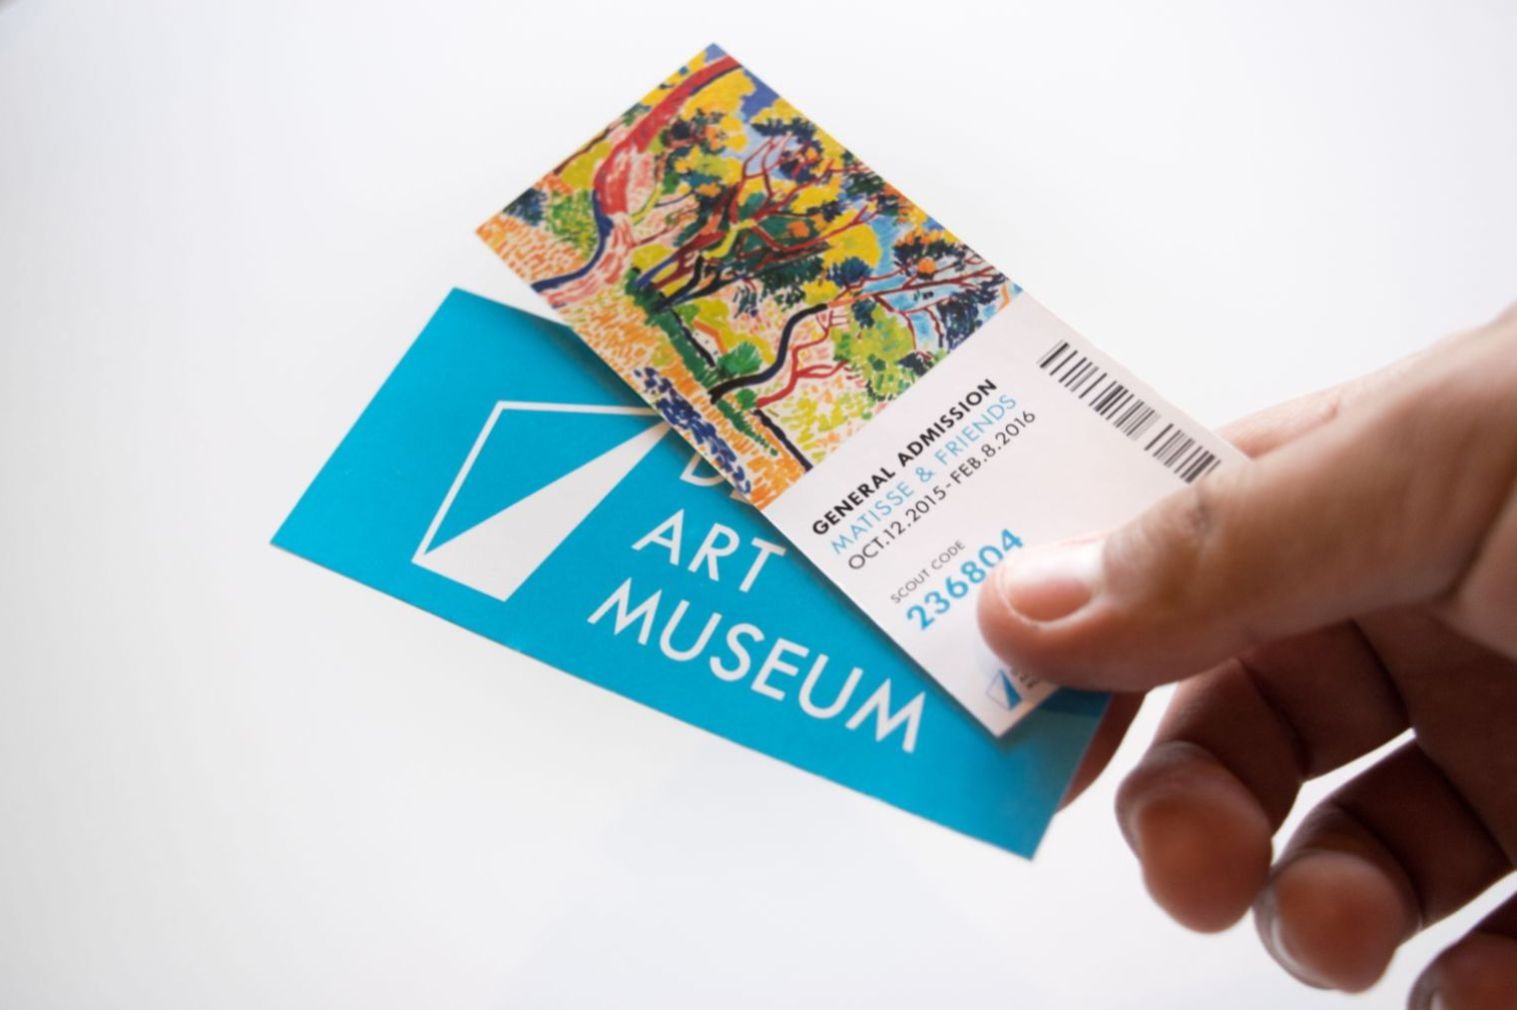 How to save on your ticket when visiting museums - Winter Portal